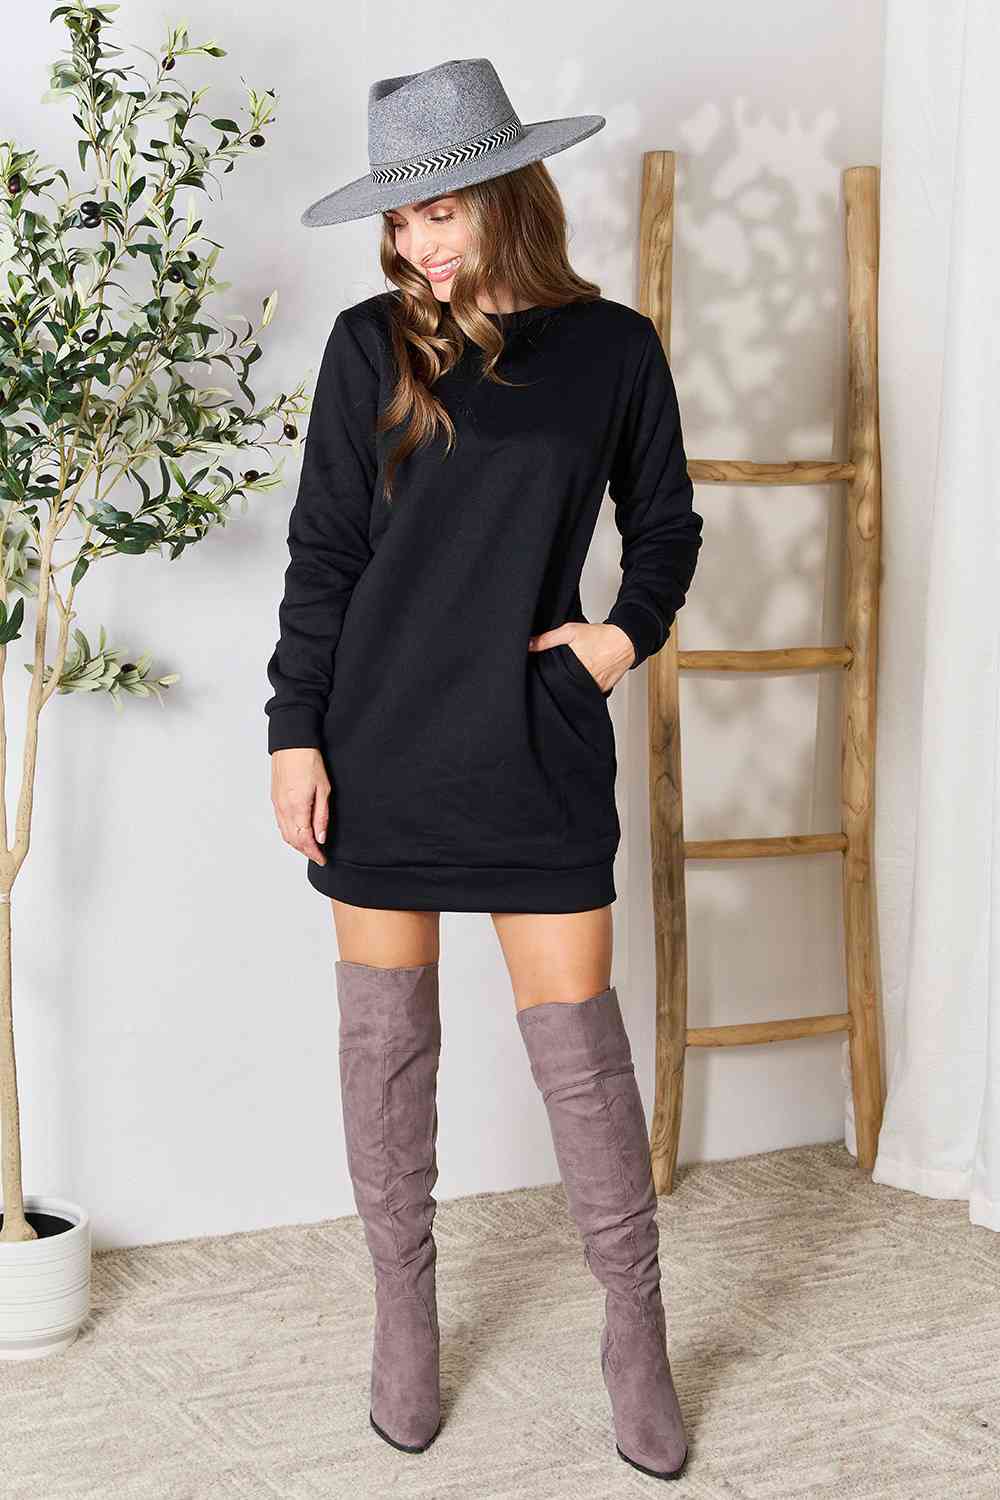 a woman wearing a black sweater dress and over the knee boots